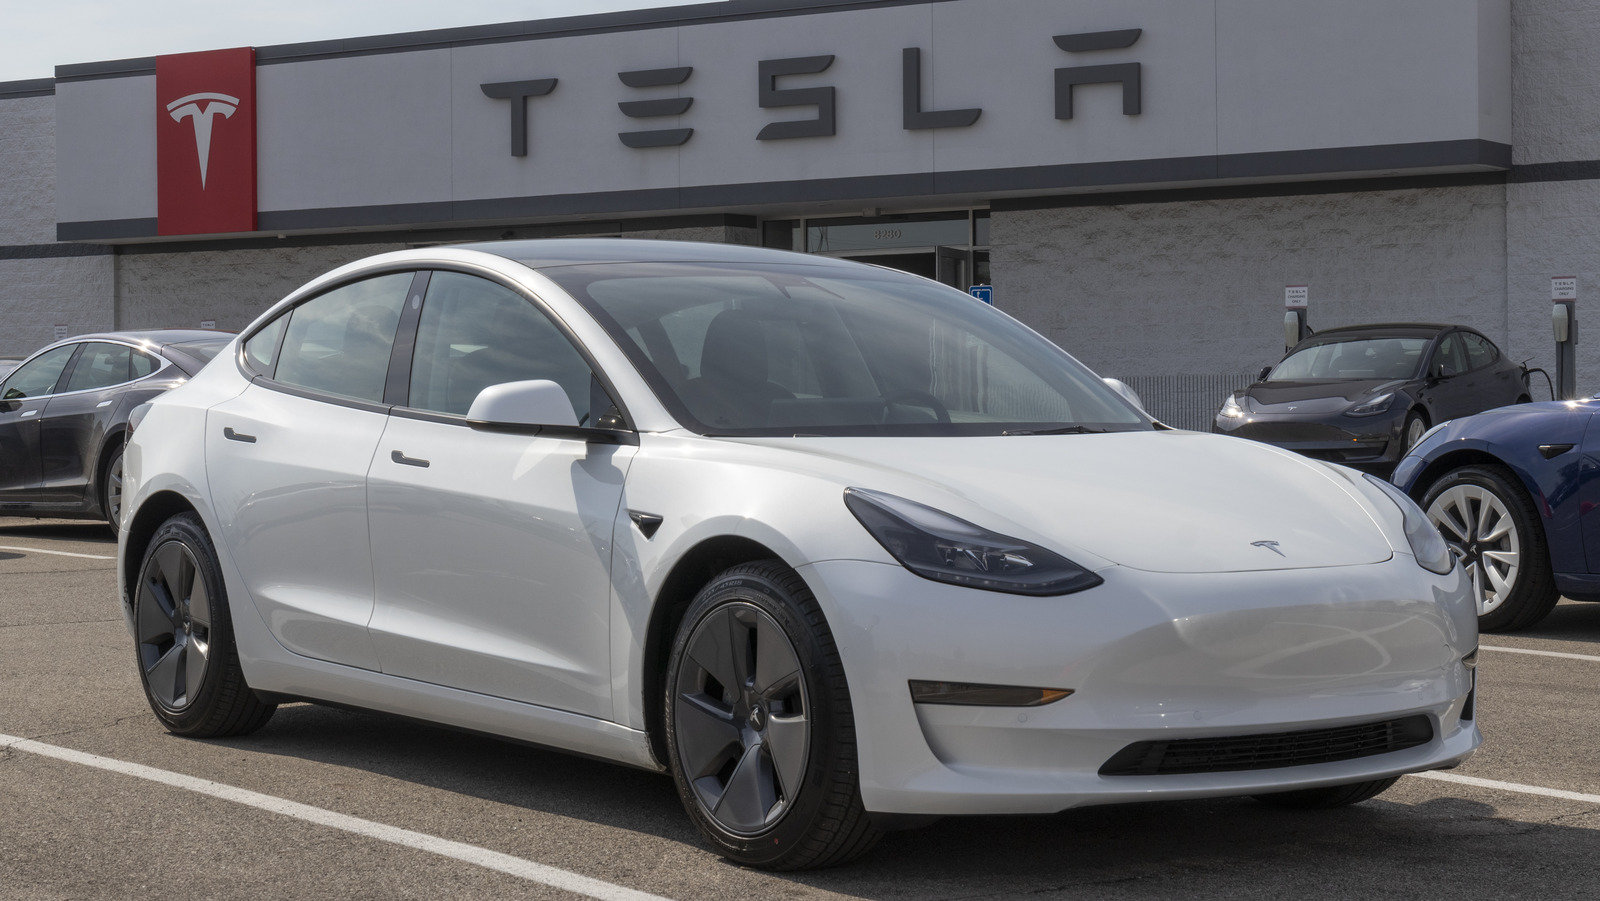 5 Must-Have Tesla Accessories To Keep Your EV Looking New